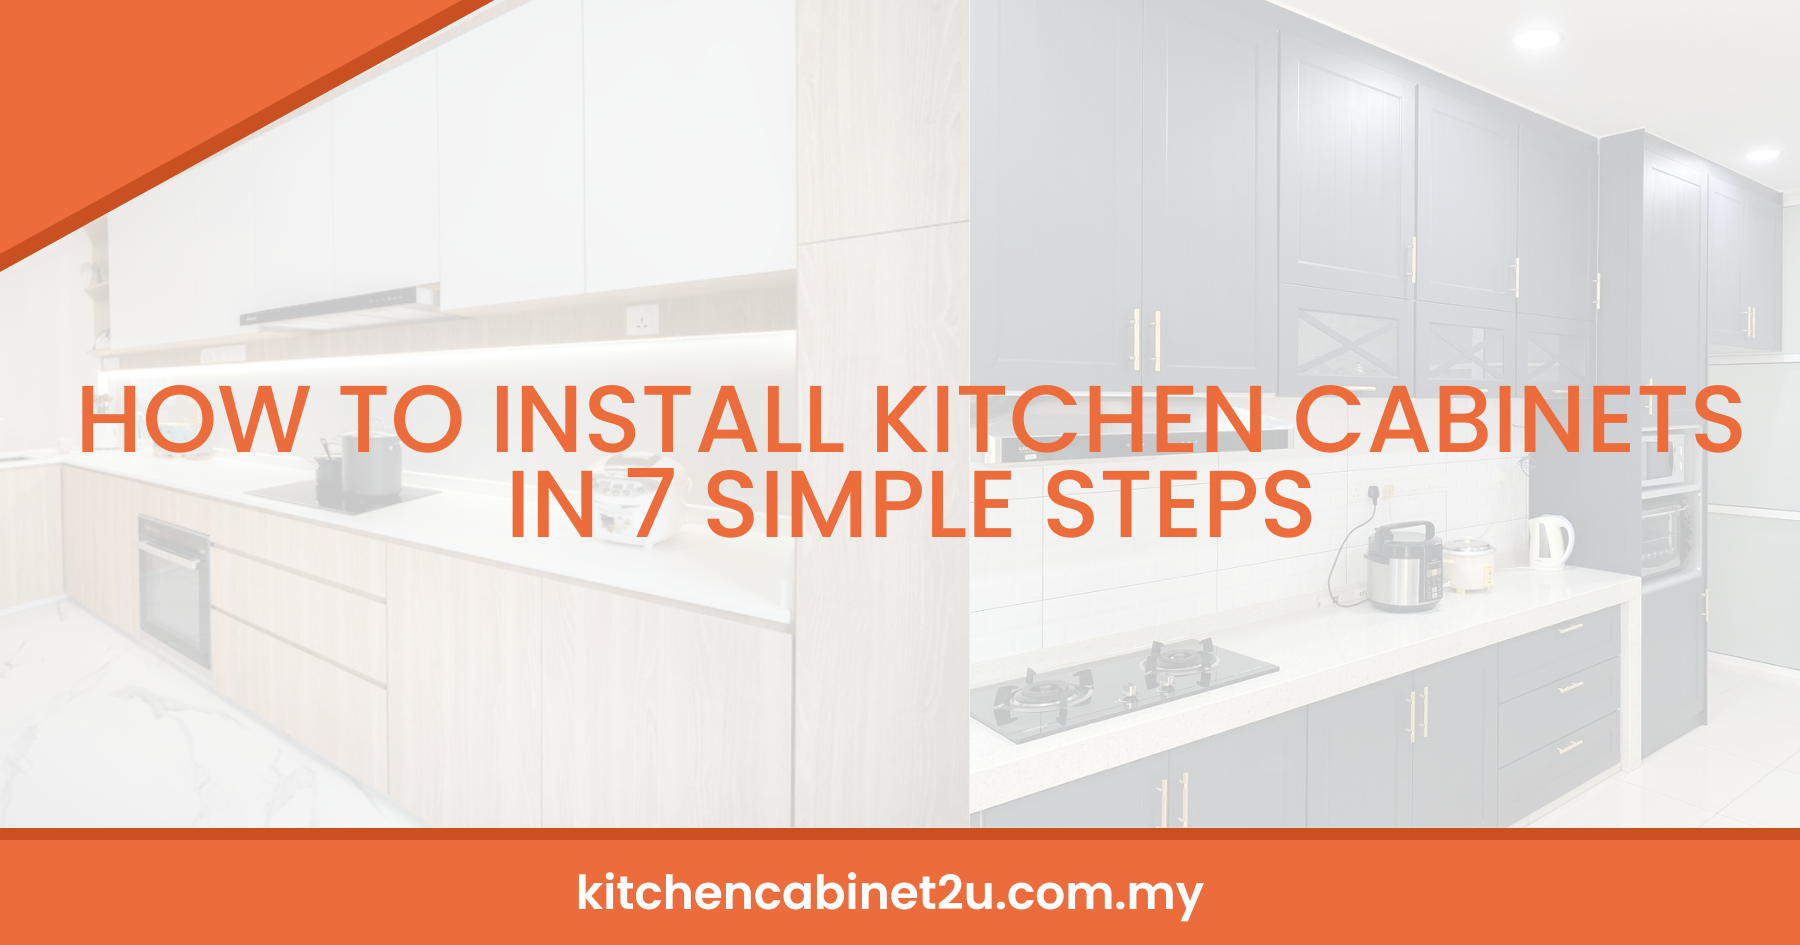 How to Install Kitchen Cabinets In 7 Simple Steps